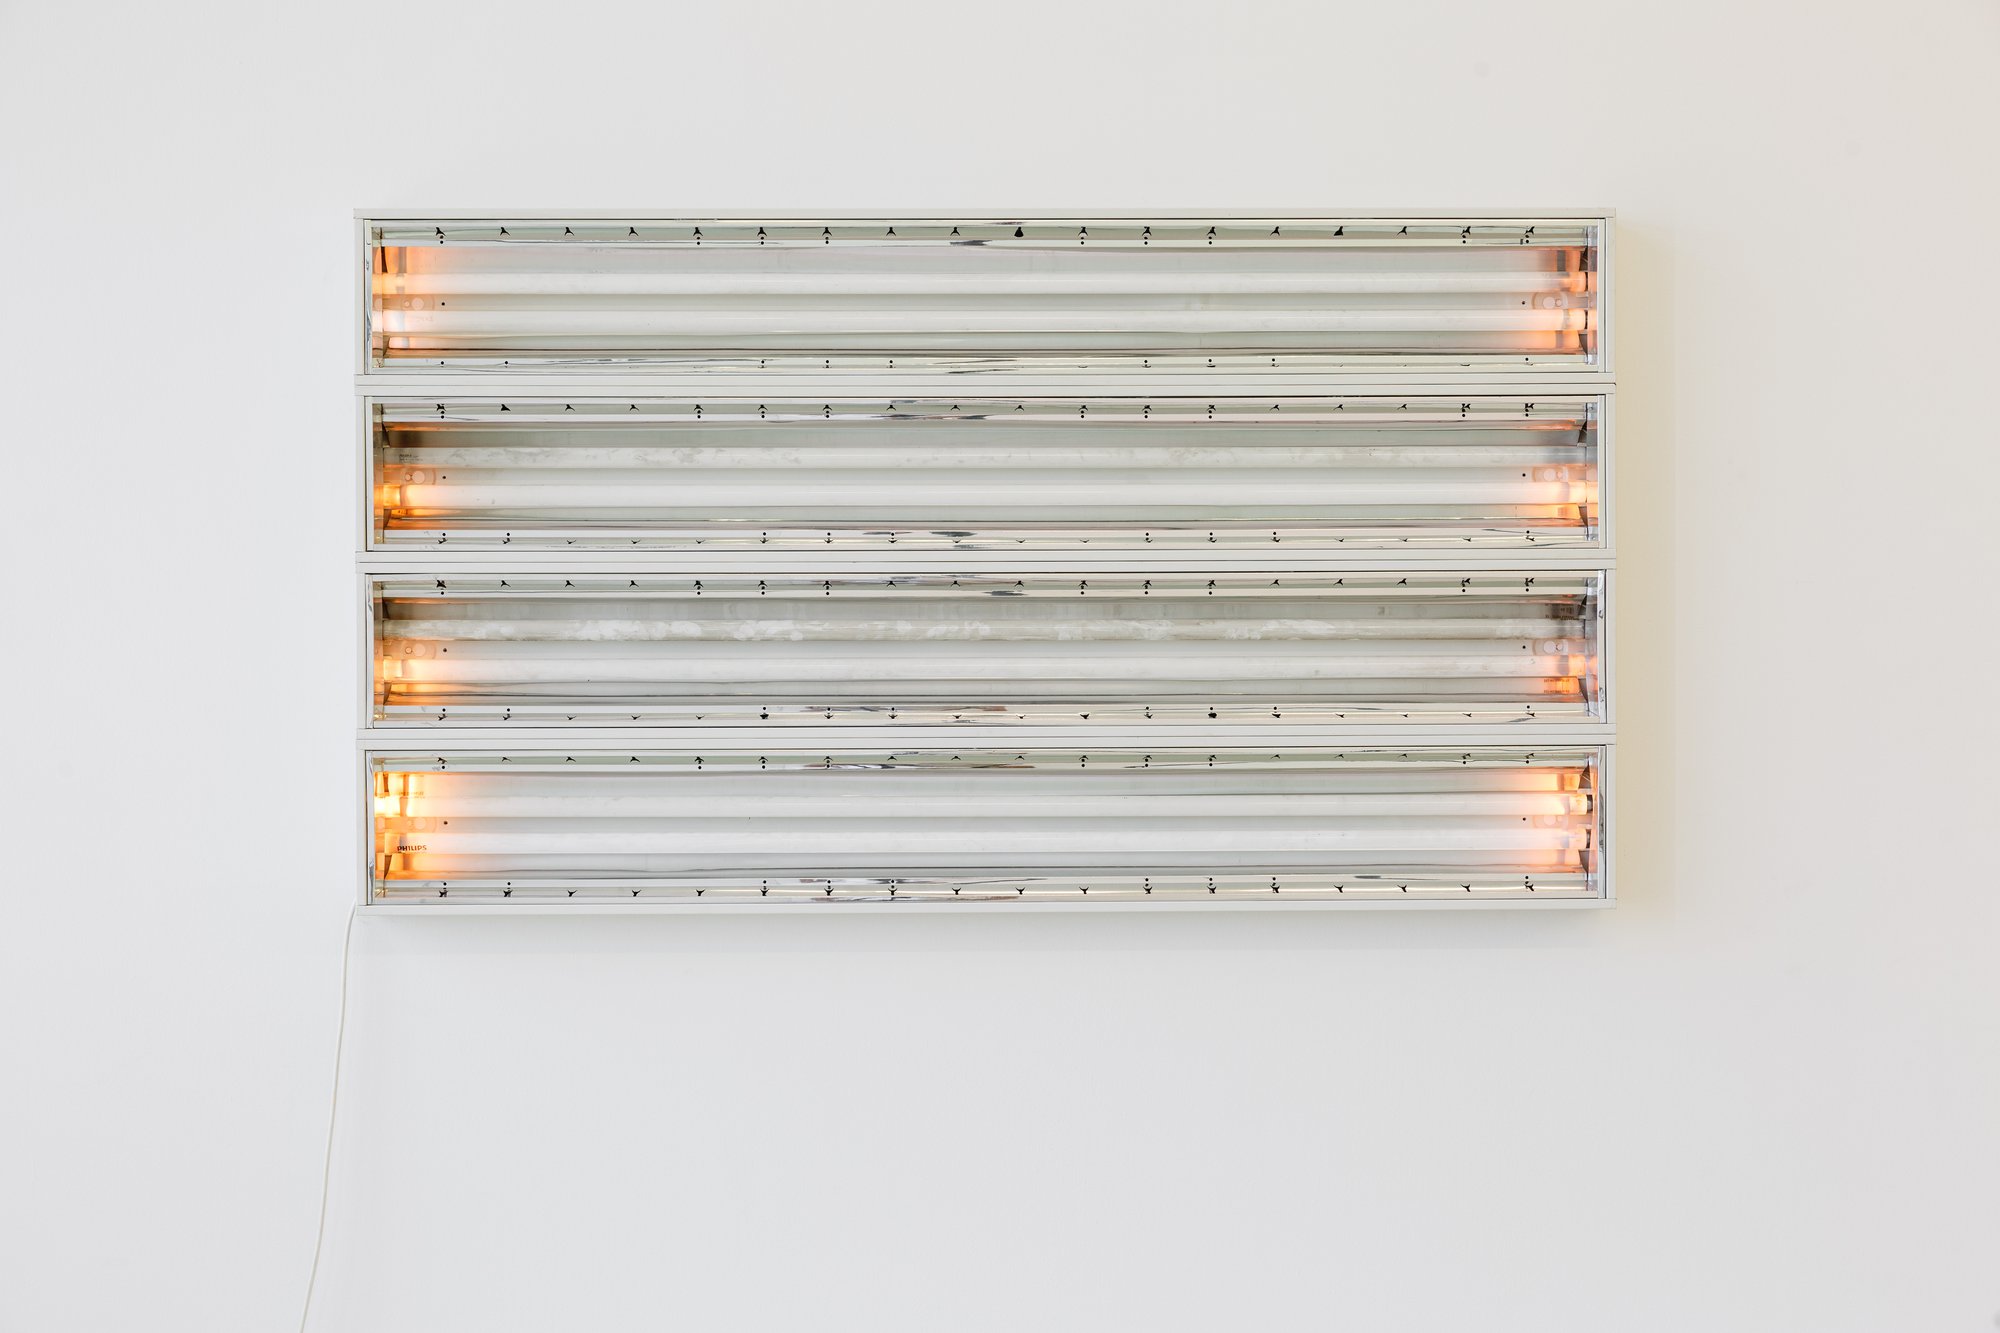 Iris Touliatou, untitled (still not over you), 2017/2021/VIII, ceiling light fixtures acquired from defunct offices in Athens, aluminium frame, fluorescents, wires, cable, 153 x 84 x 9 cm (60 1/4 x 33 1/8 x 3 1/2 in), 2021.